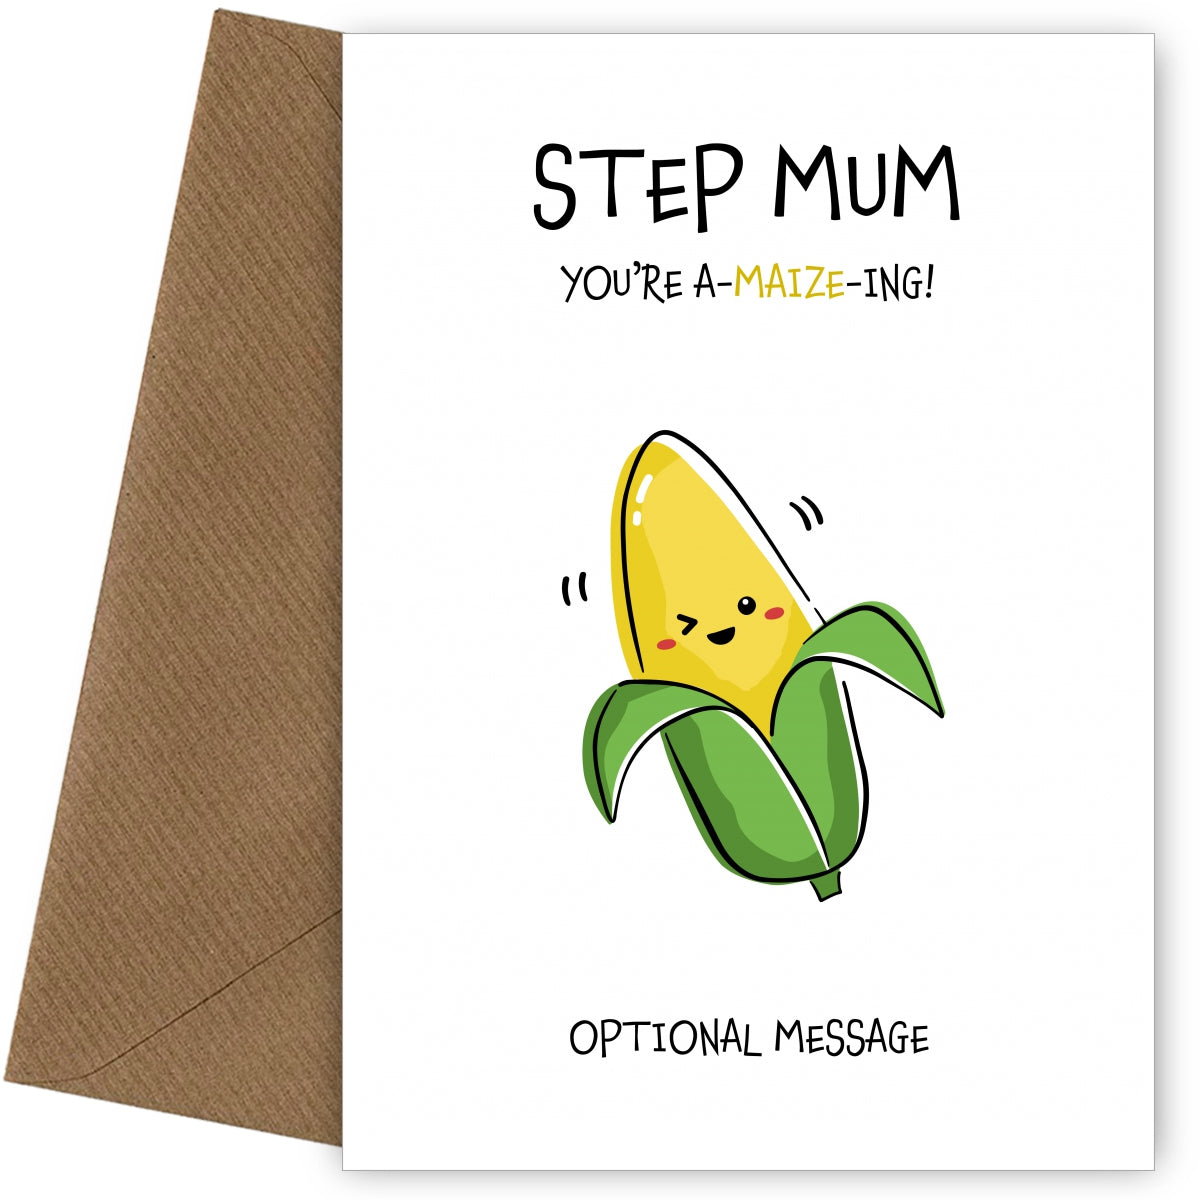 Amazing Birthday Card for Step Mum - You're A-Maize-ing